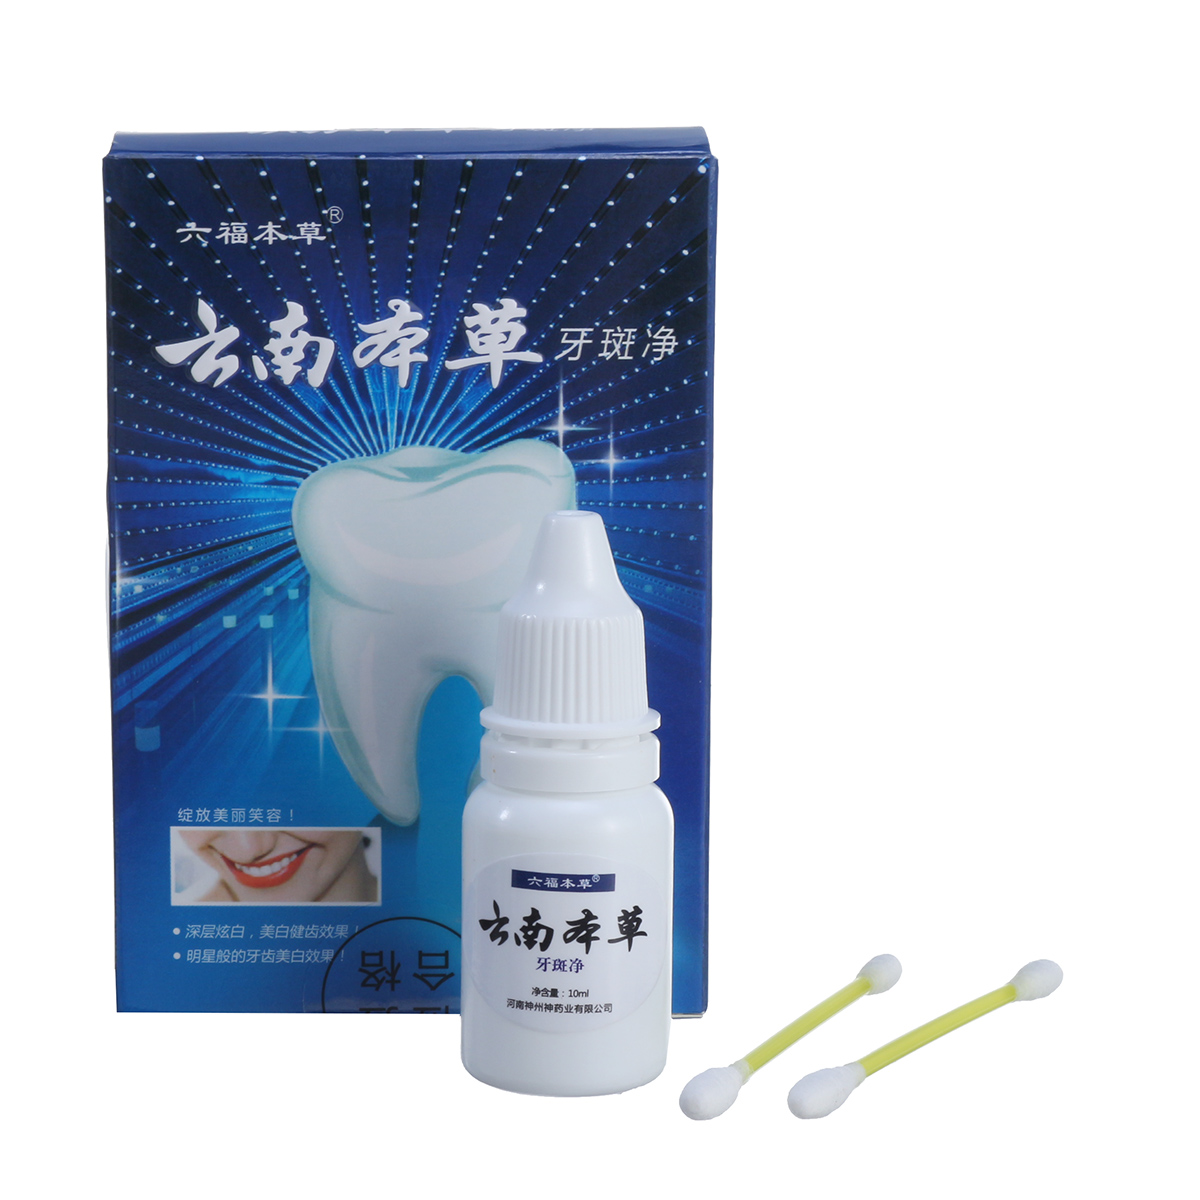 Herb-Teeth-Whitening-Cleansing-Serum-Essence-Oral-Hygiene-Effectively-Removes-Tartars-Plaque-Stains--1815887-11